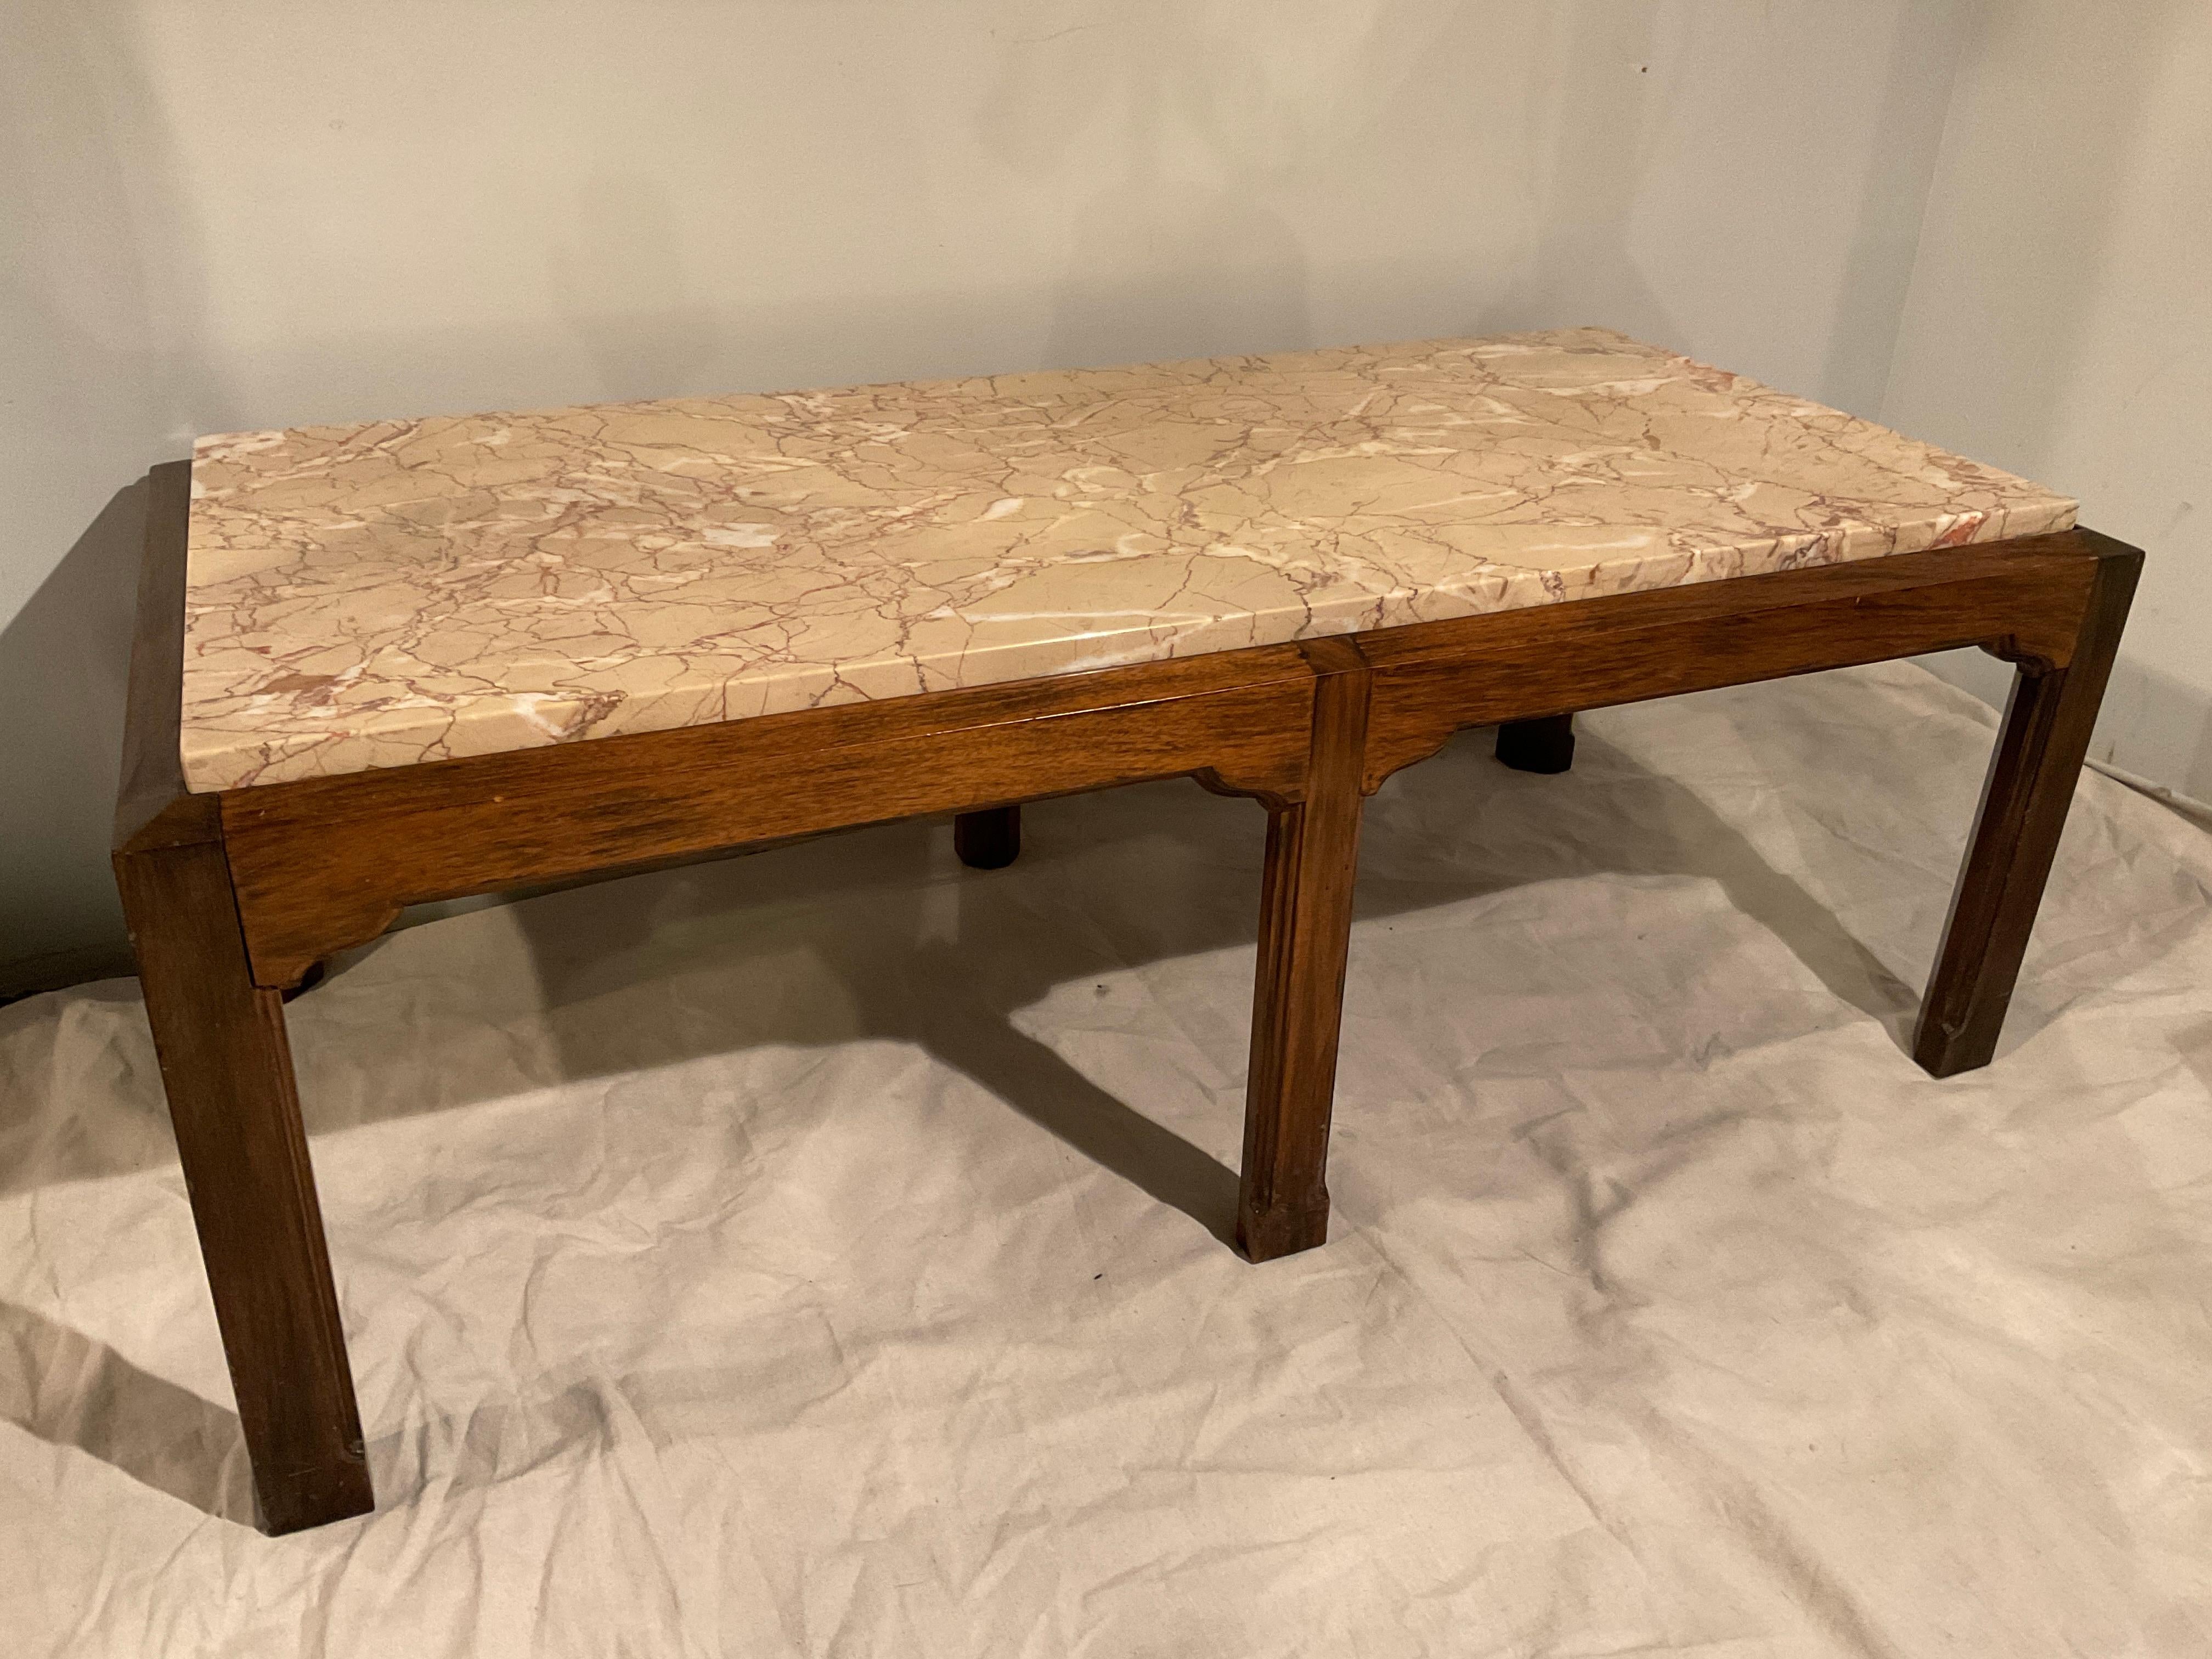 Marble top coffee table on wood base by Charak made in 1952.